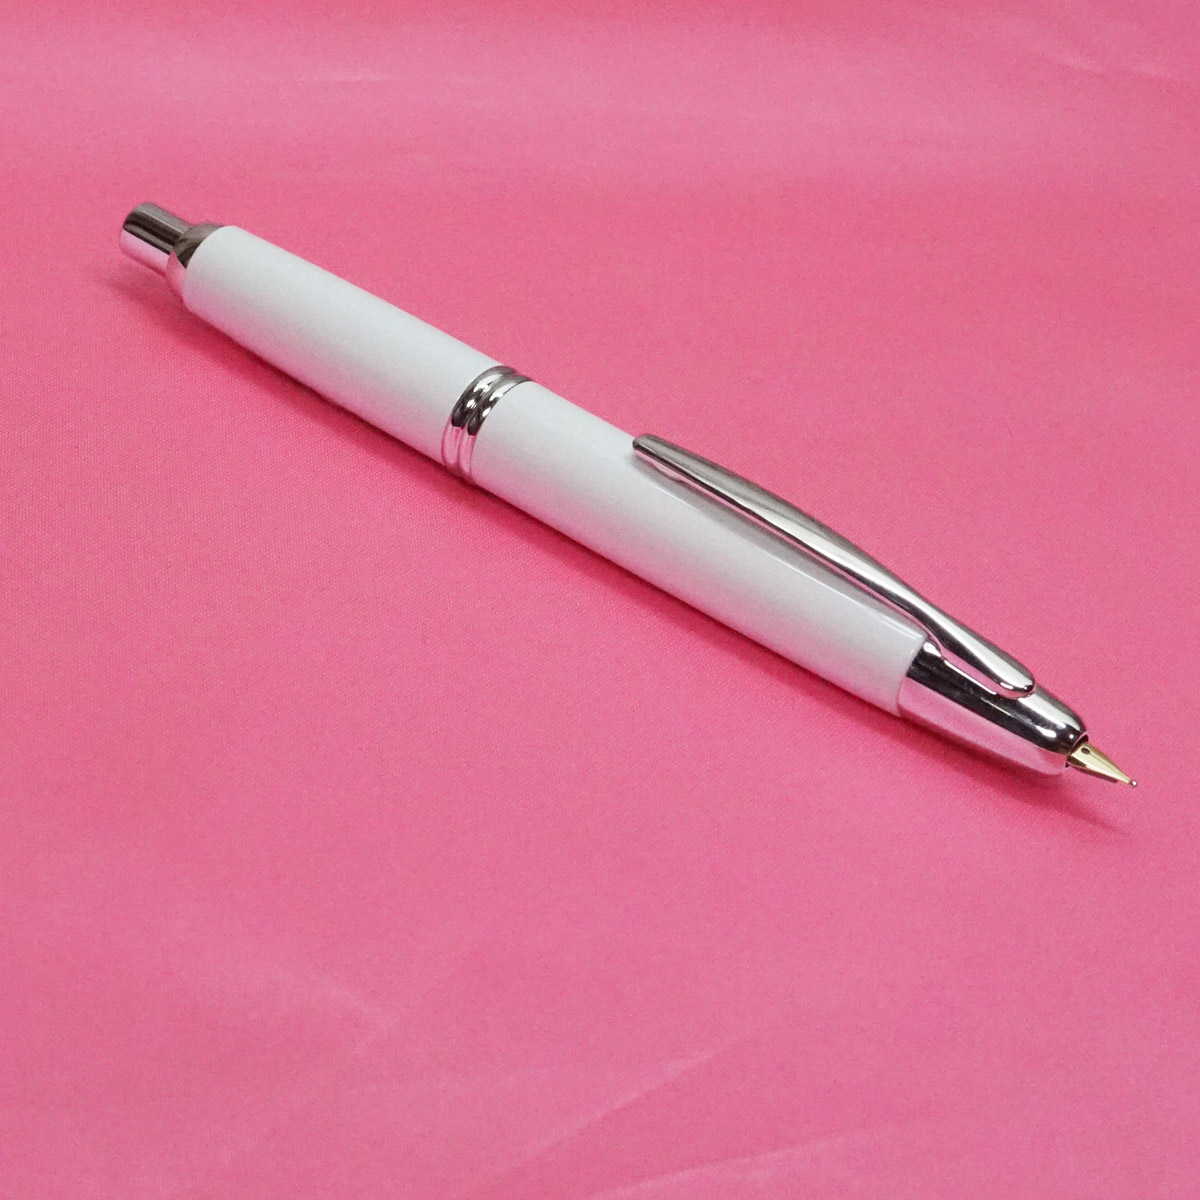 Pilot Capless White  Body with Silver Trims Namiki Rubber Sac Converter Type Fountain Pen with Gold Plated Medium Tipped Nib  SKU 21977